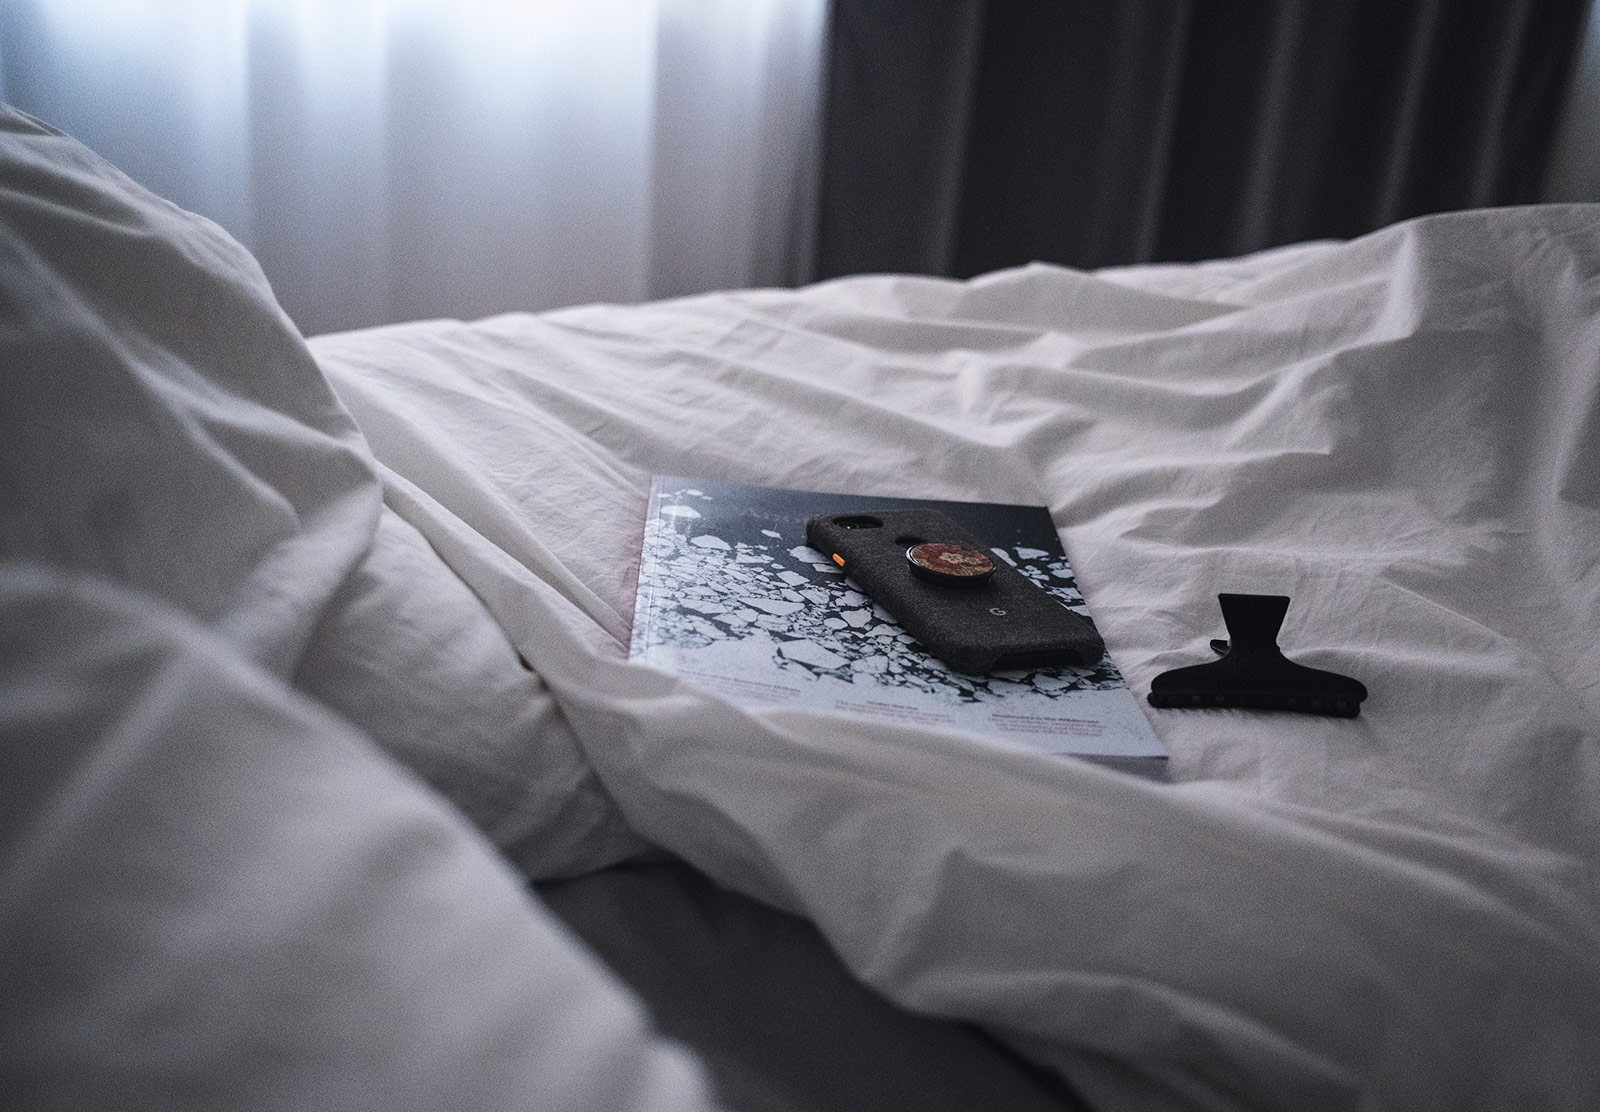 Book on a bed